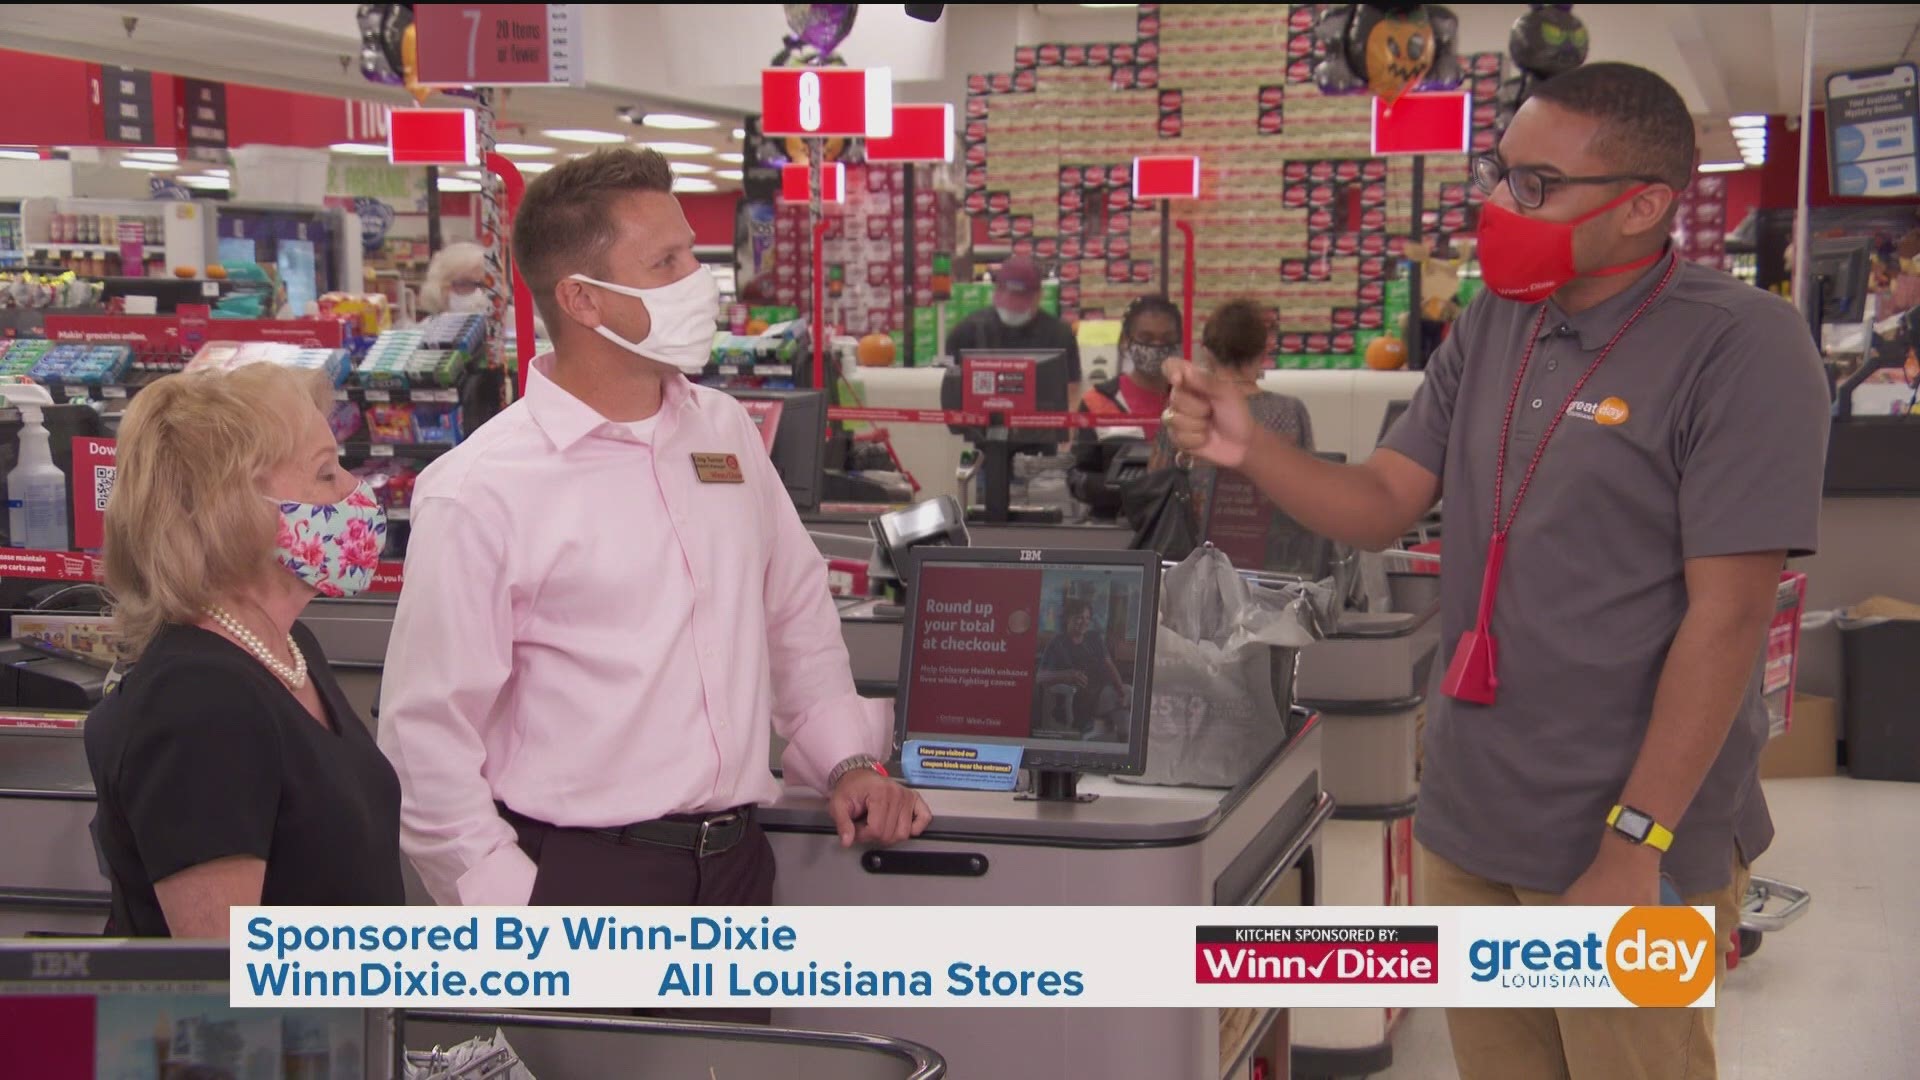 Winn-Dixie is teaming up with Ochsner Health to support patients undergoing cancer treatments. Winn-Dixie customers can help by rounding up their total grocery bill.